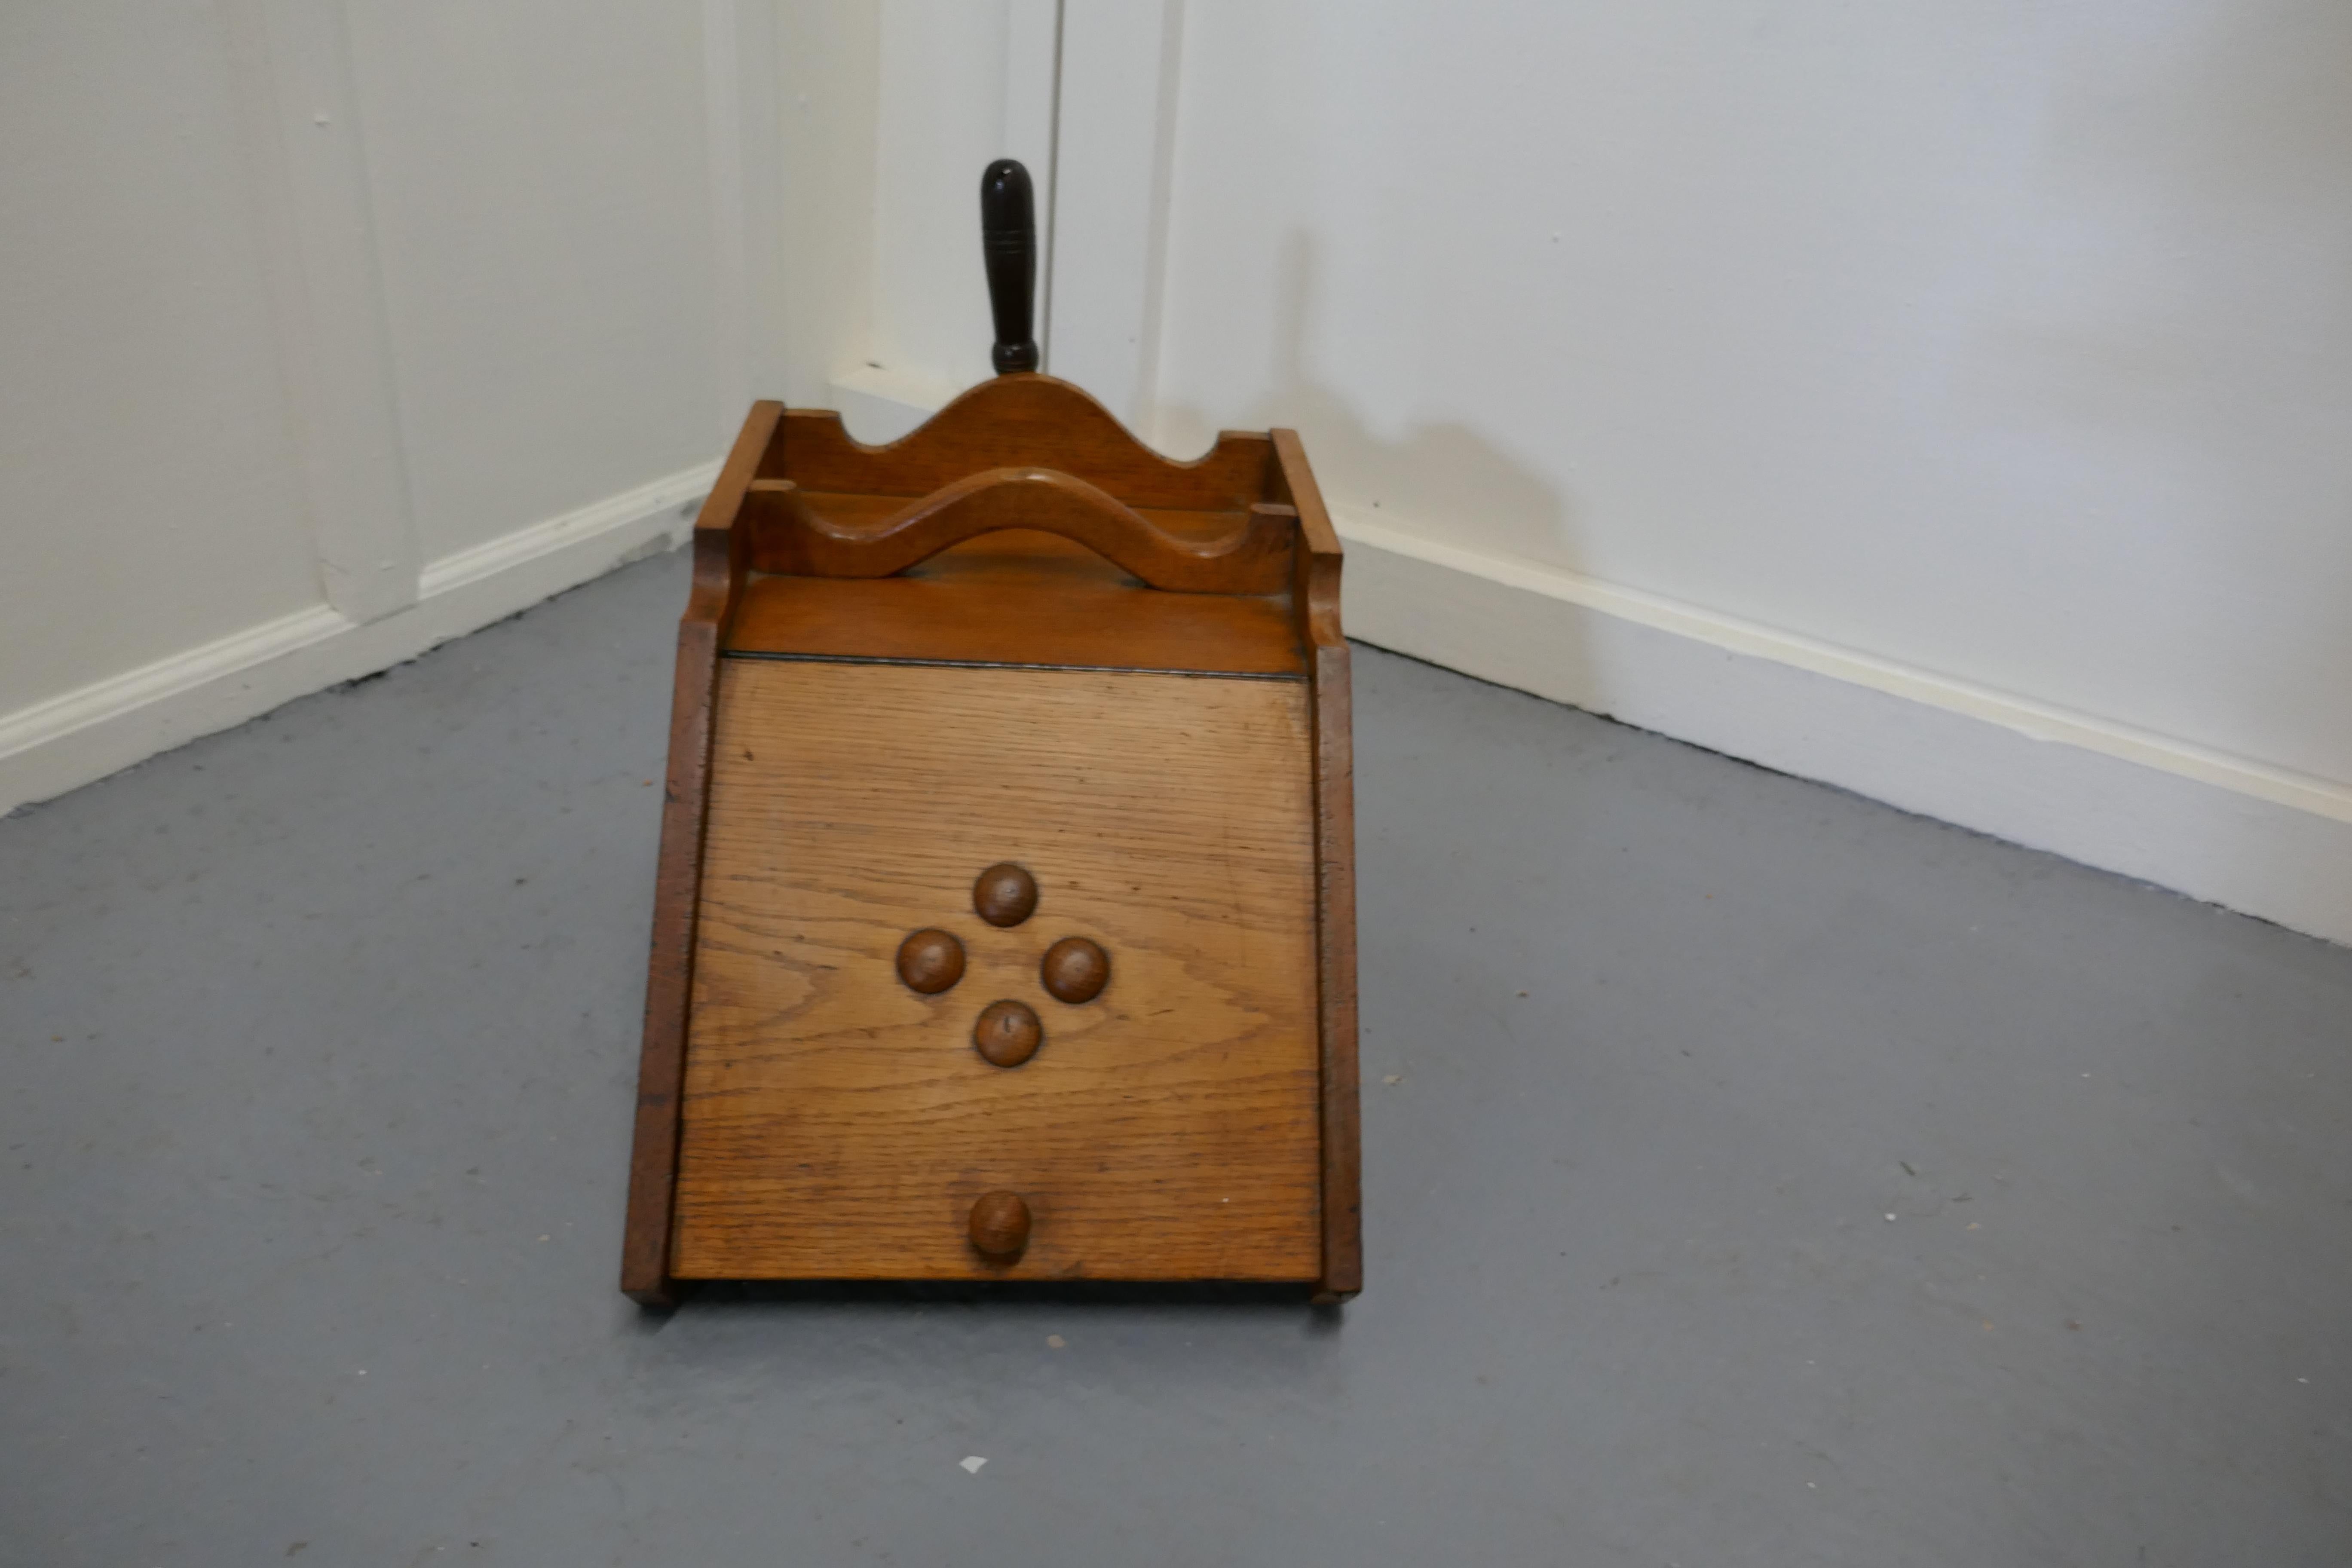 A Victorian golden ash coal box with liner and shovel

A charming piece of useful Victorian furniture
It has sloping front and a brass shovel holder in the back and inside a 2 handled metal liner
It is in good antique condition
The scuttle is